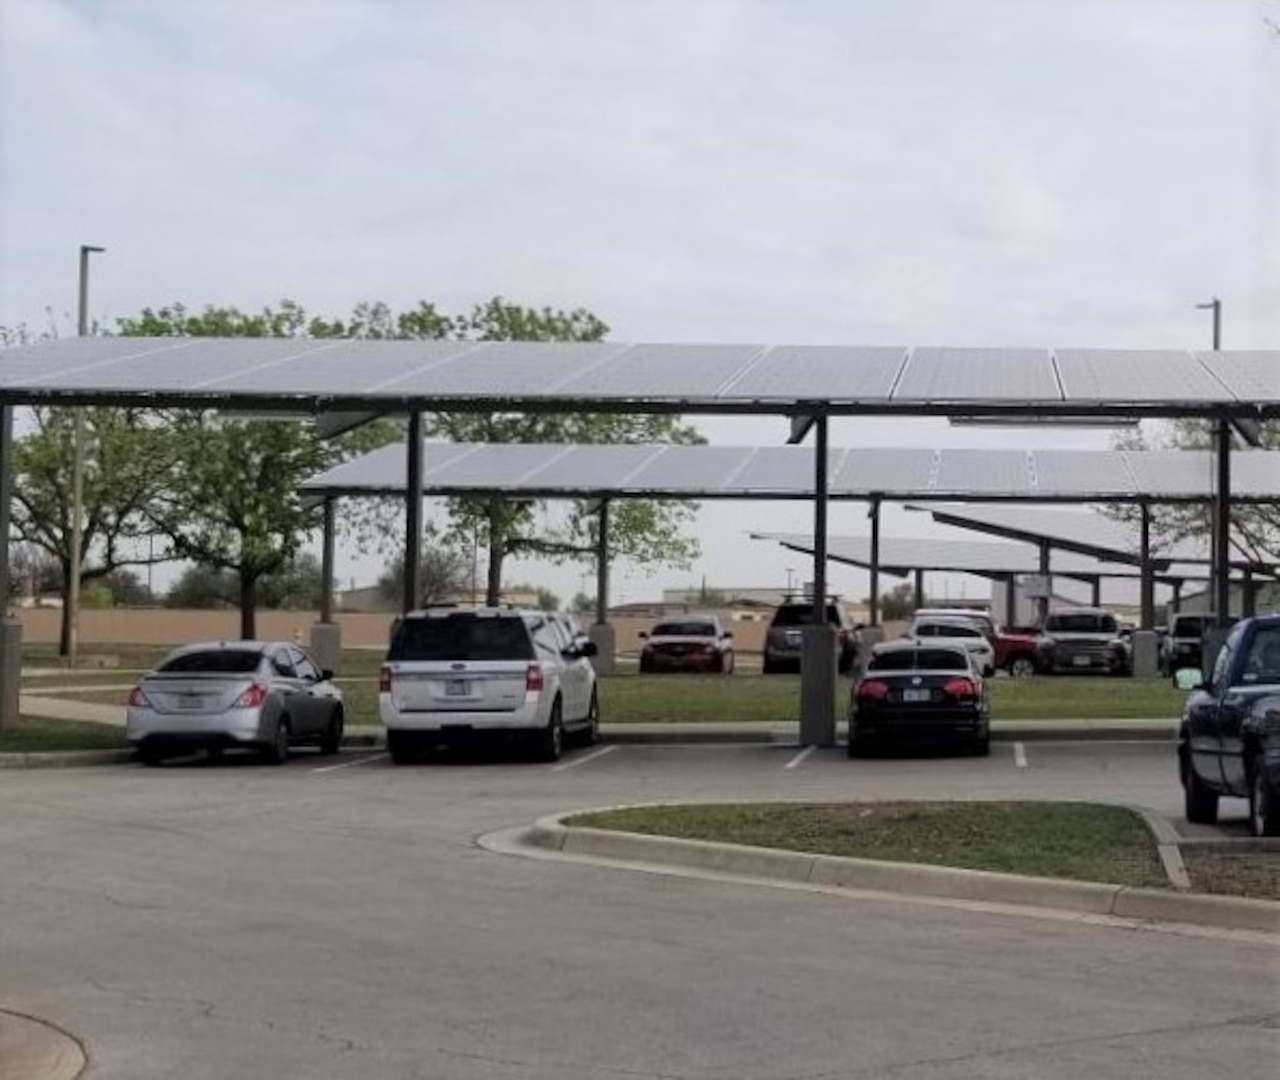 A Department of Energy, Energy Saving Performance Contract project at Joint Base San Antonio involves the installation of solar energy systems on 55 buildings, and over several parking areas, at a cost of about $46 million. Systems will be installed on JBSA-Lackland, -Kelly Annex, -Chapman Training Annex, and -Fort Sam Houston